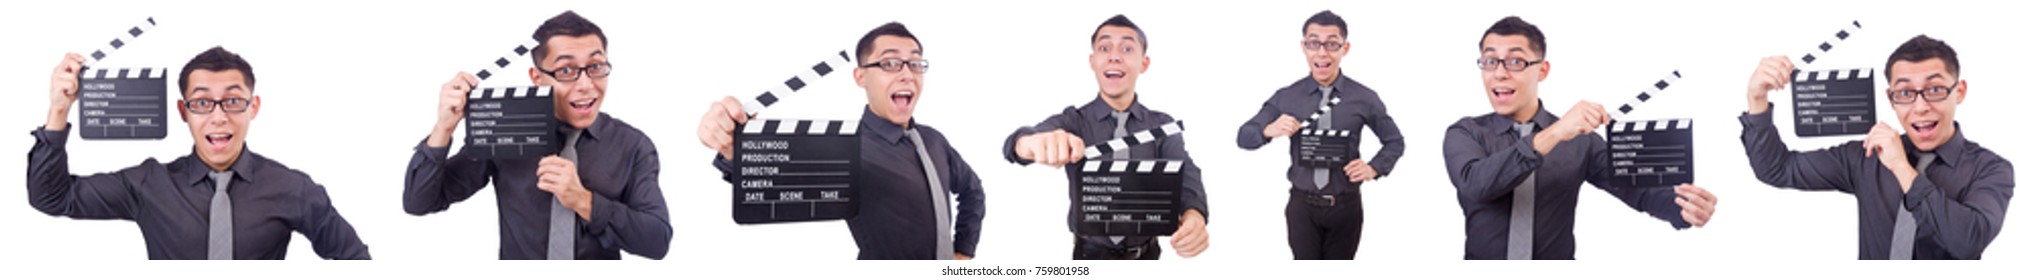 Funny man with movie clapper - Shutterstock ID 759801958